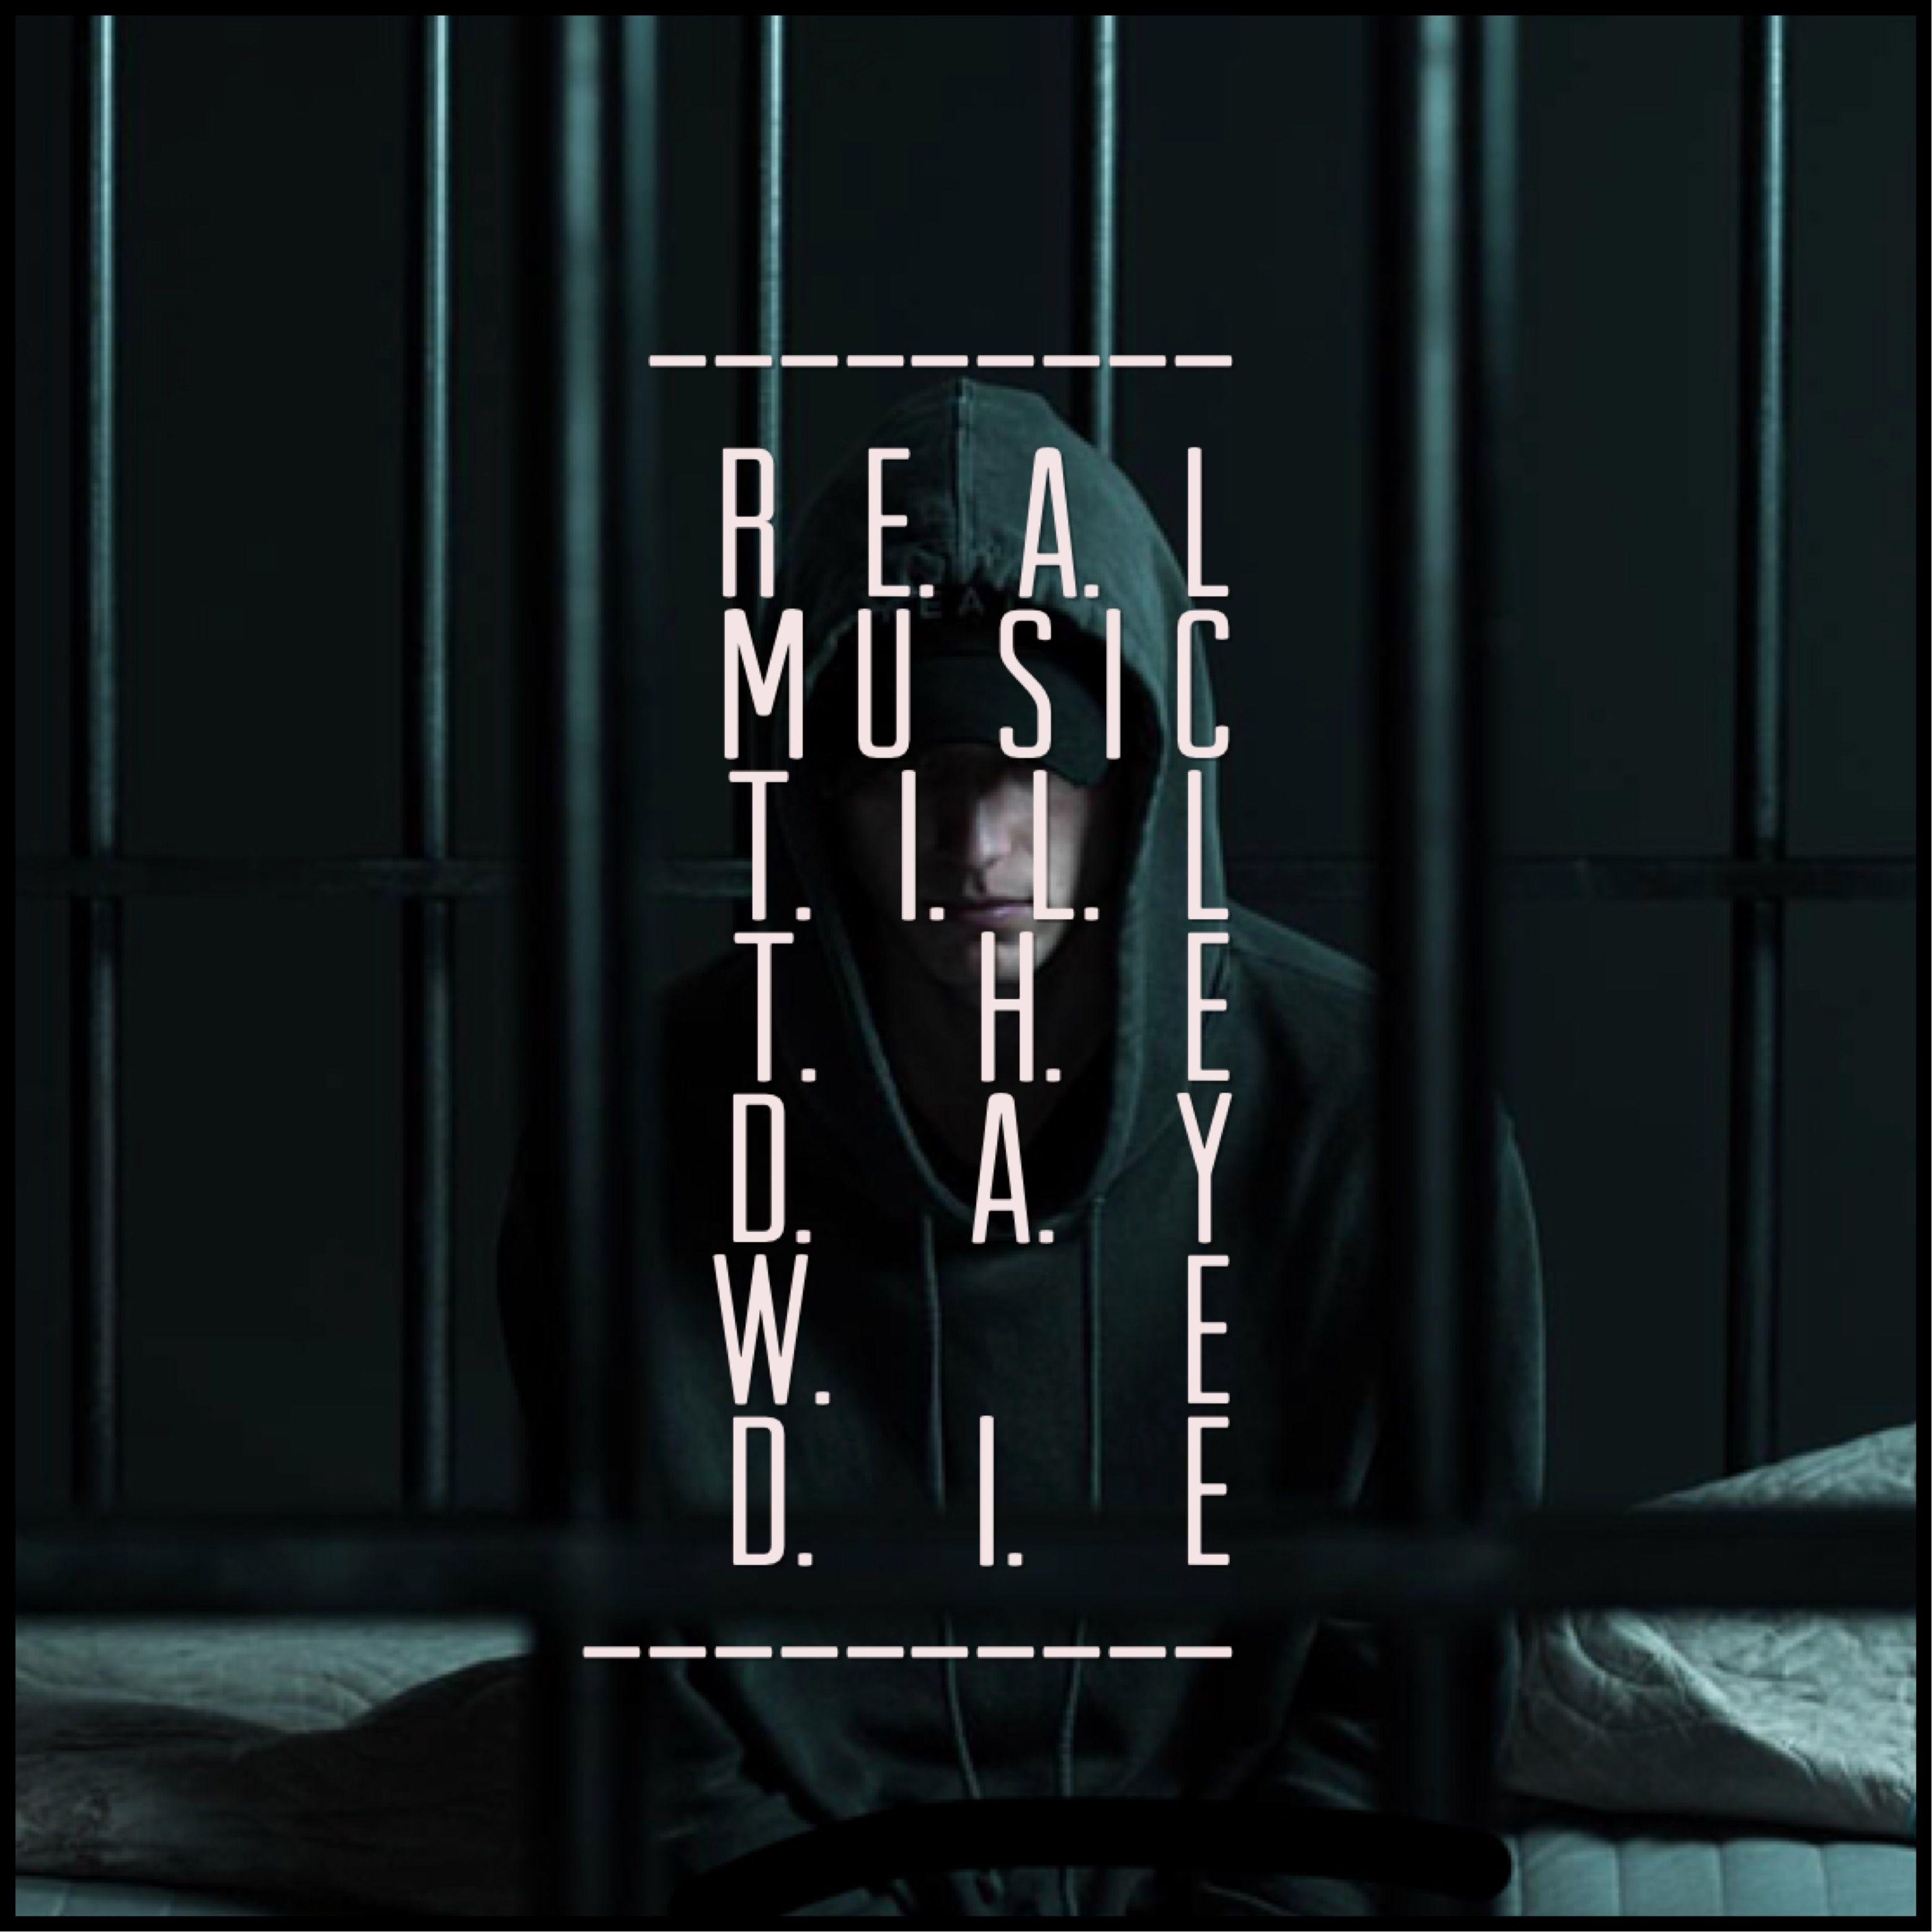 NF Real Music Wallpapers Top Free NF Real Music Backgrounds